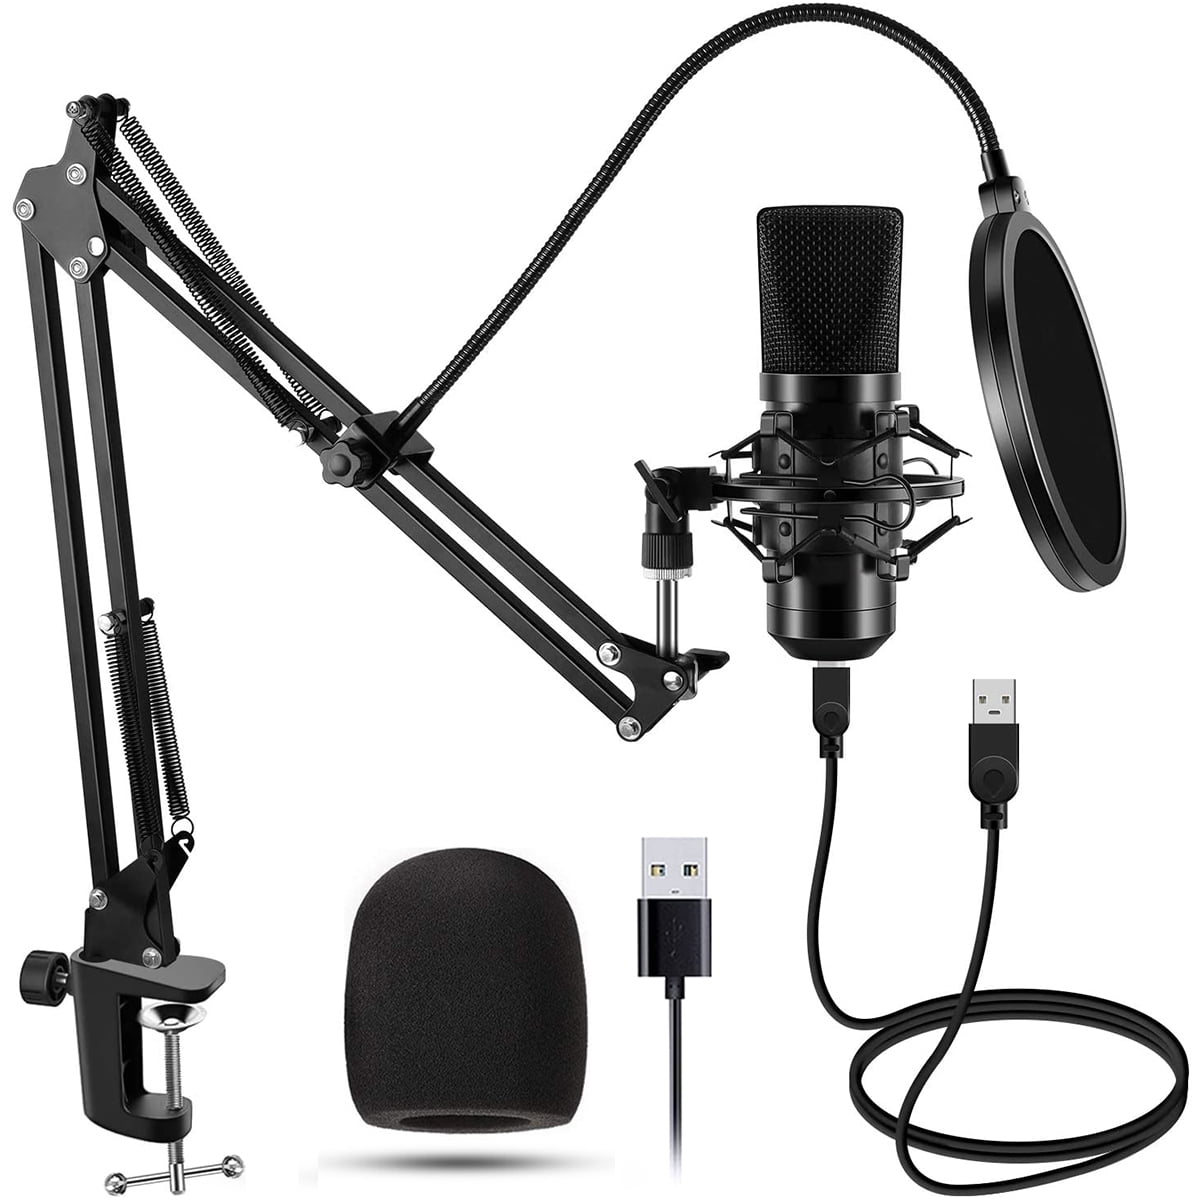 MY MIC W111 192khz Podcast Studio Recording Condenser USB Microphone For  Computer Gaming PC Laptop Vocals Broadcasting Singing - AliExpress